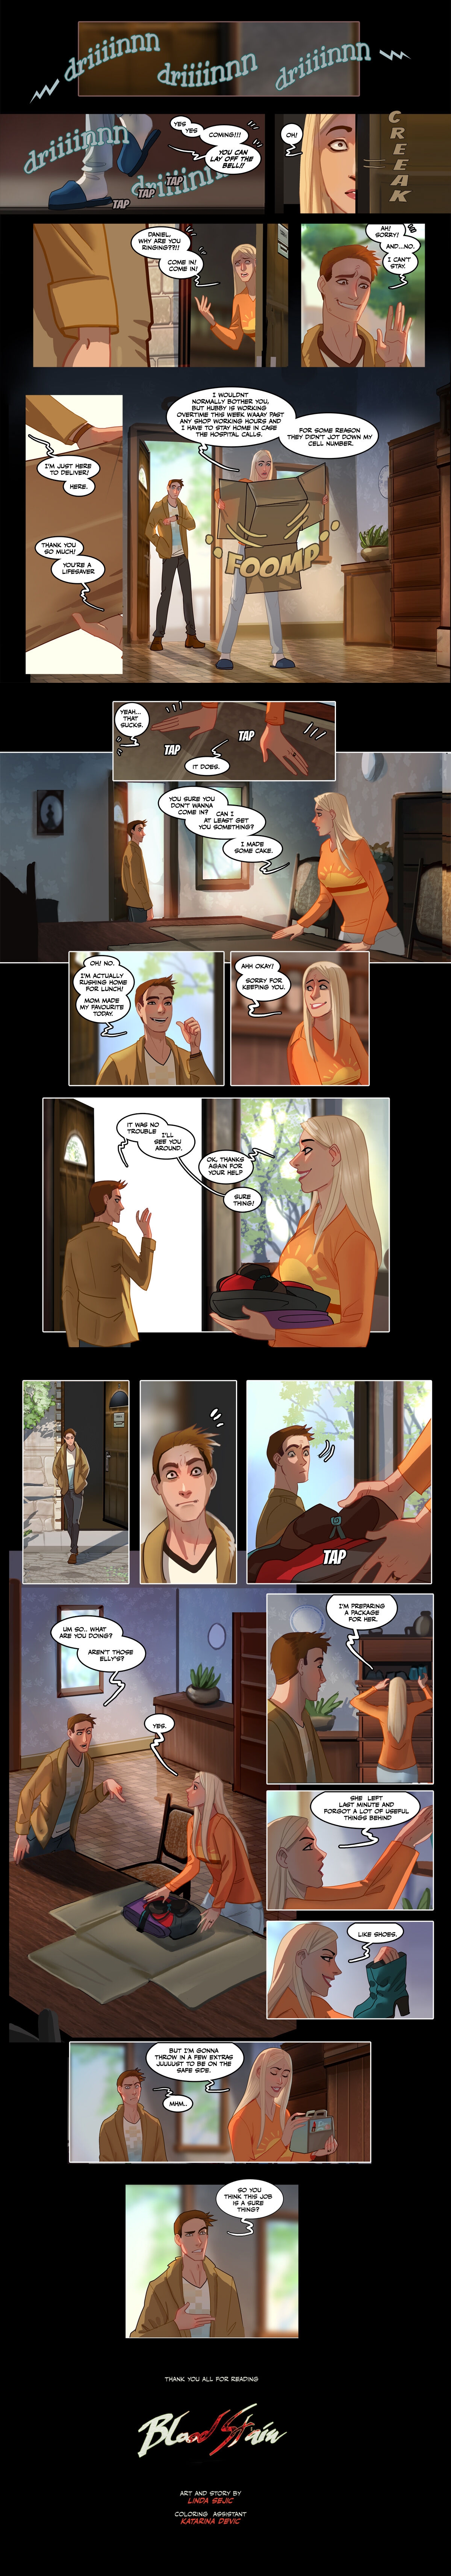 Blood Stain ch. 4 (ongoing) [Linda Sejic / Sigeel] 15